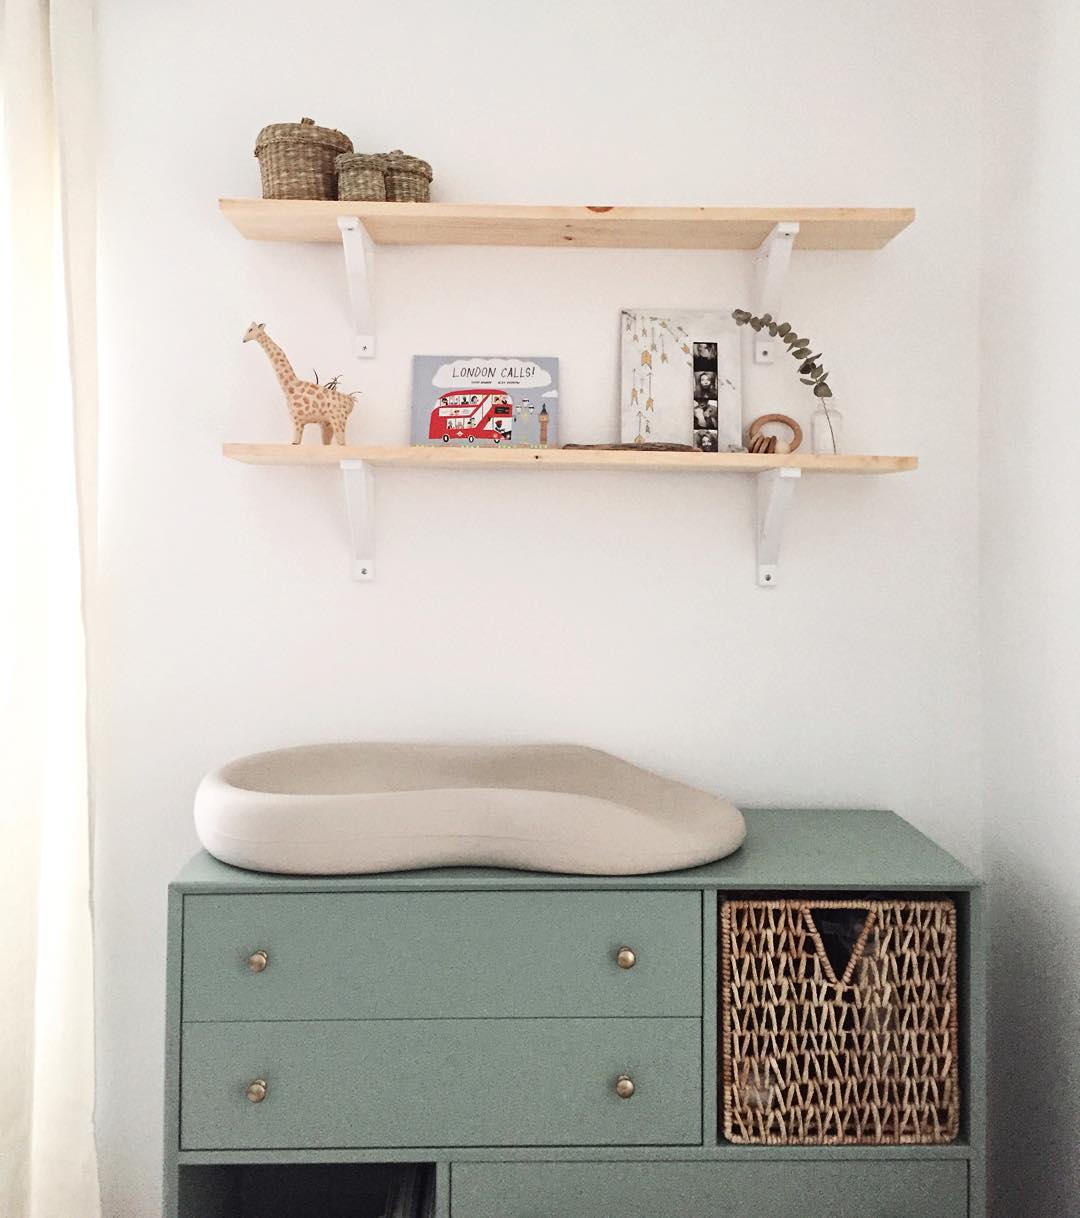 17 Nursery Baby Room Ideas For Small, Small Space Changing Table Dresser